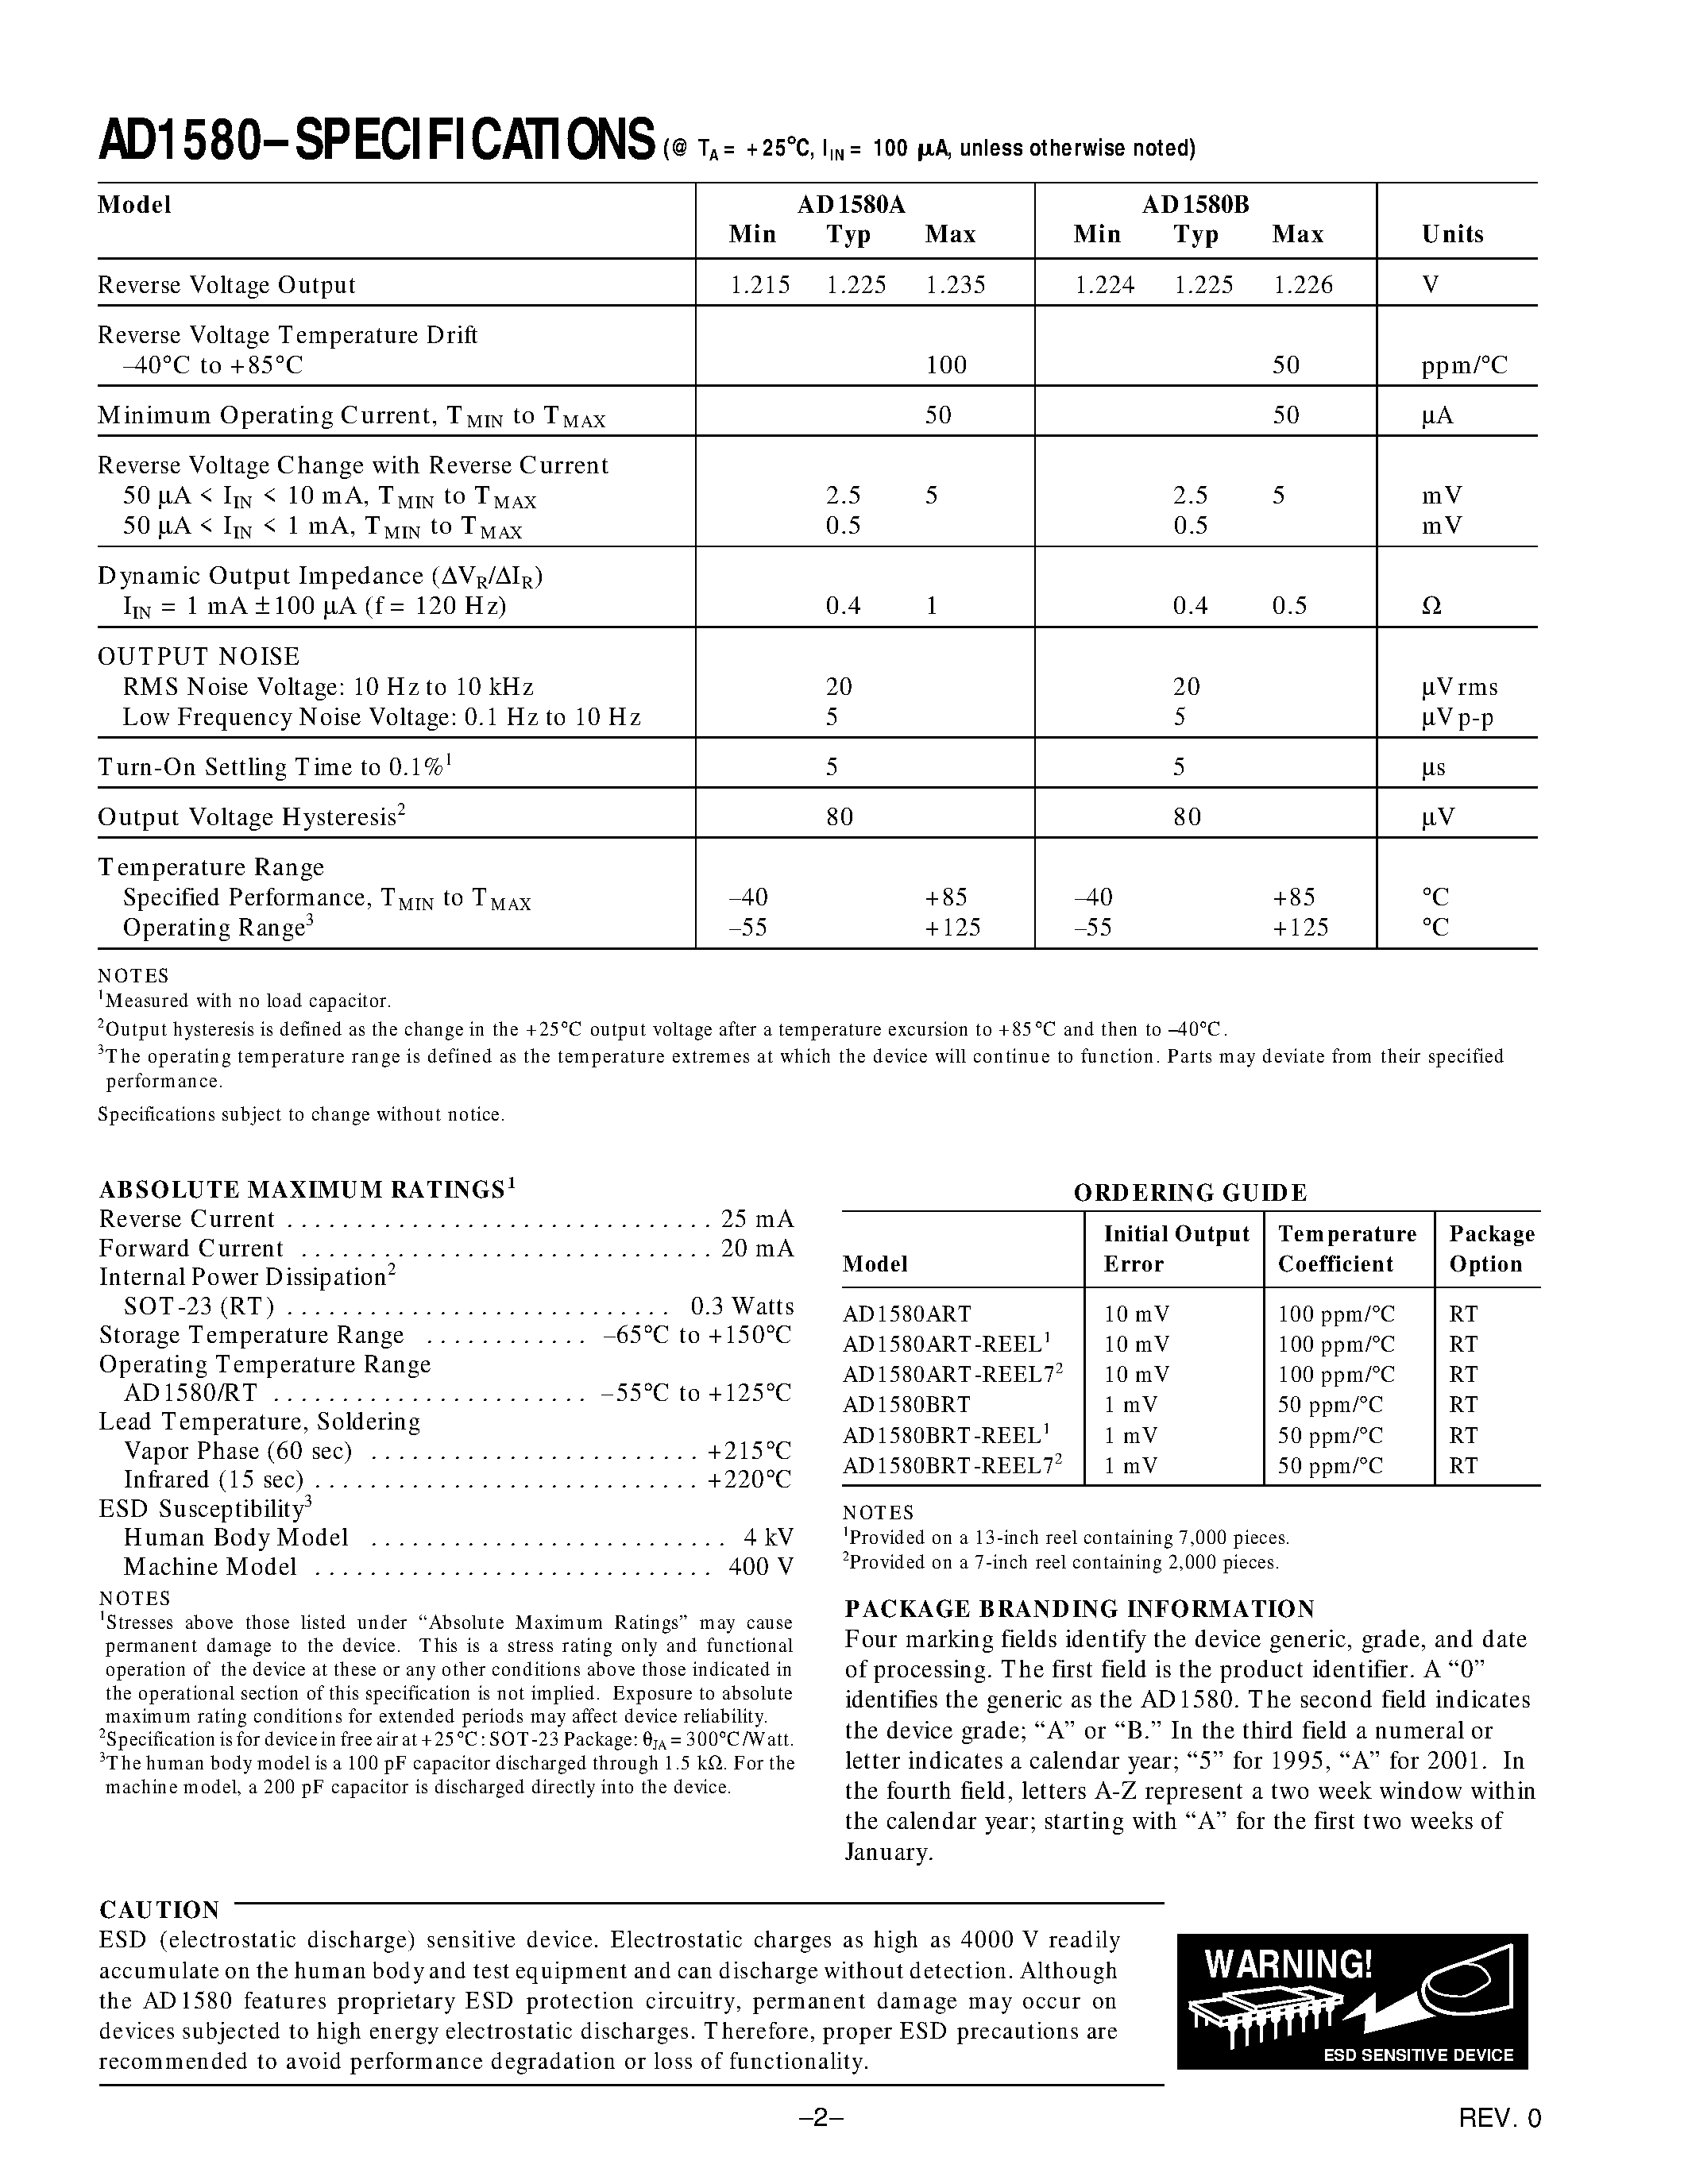 Datasheet AD1580BRT-REEL1 - 1.2 V Micropower/ Precision Shunt Voltage Reference page 2